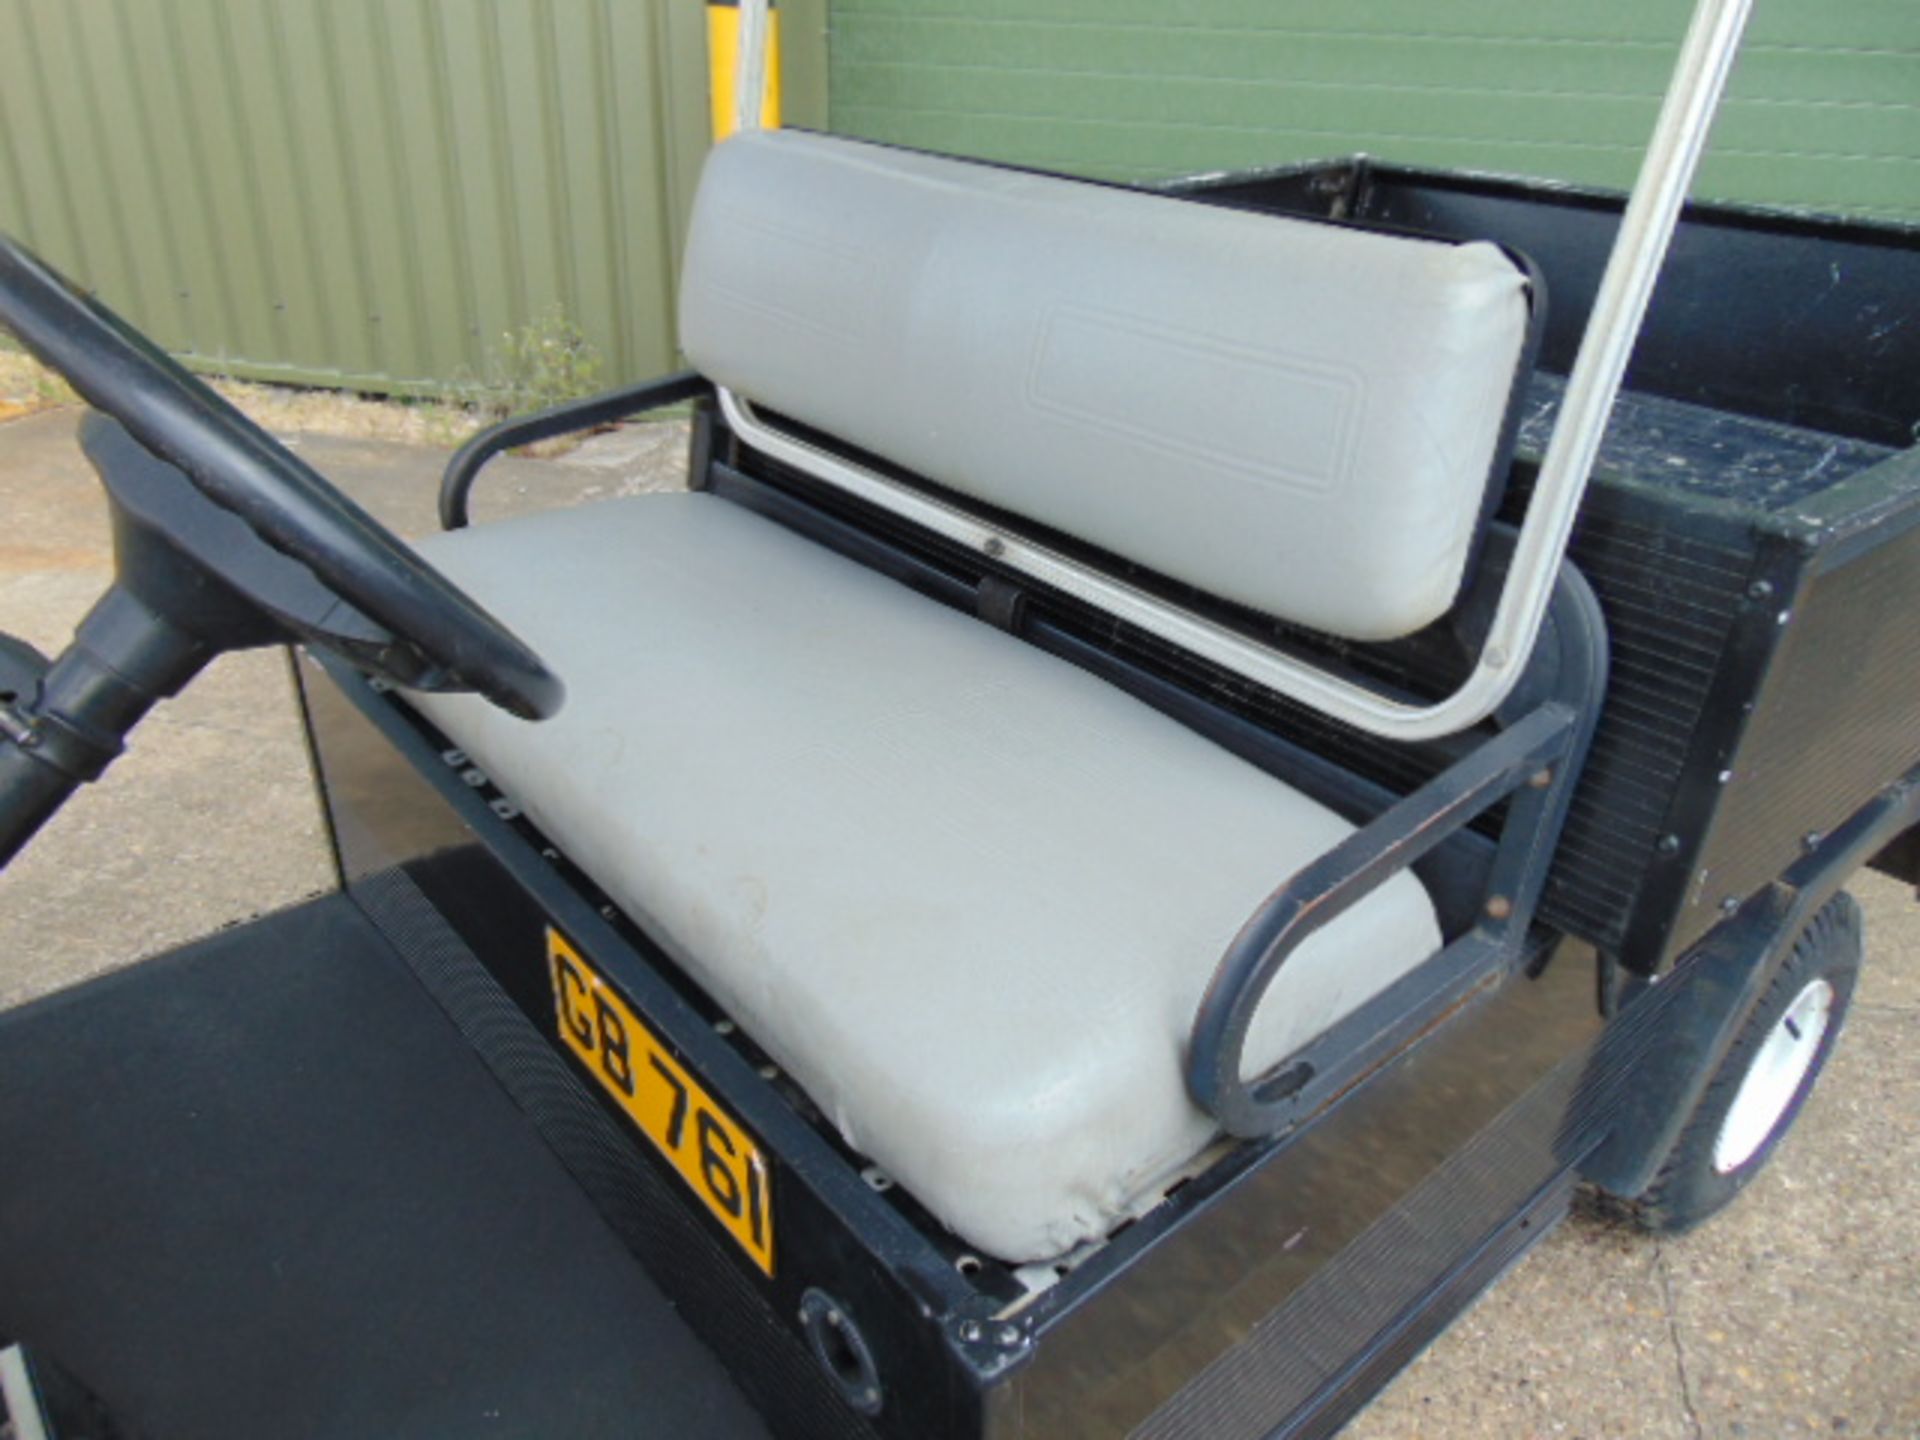 Club Car 2 Seater Golf Buggy / Estate Vehicle C/W Tipping Rear Body - Image 12 of 13